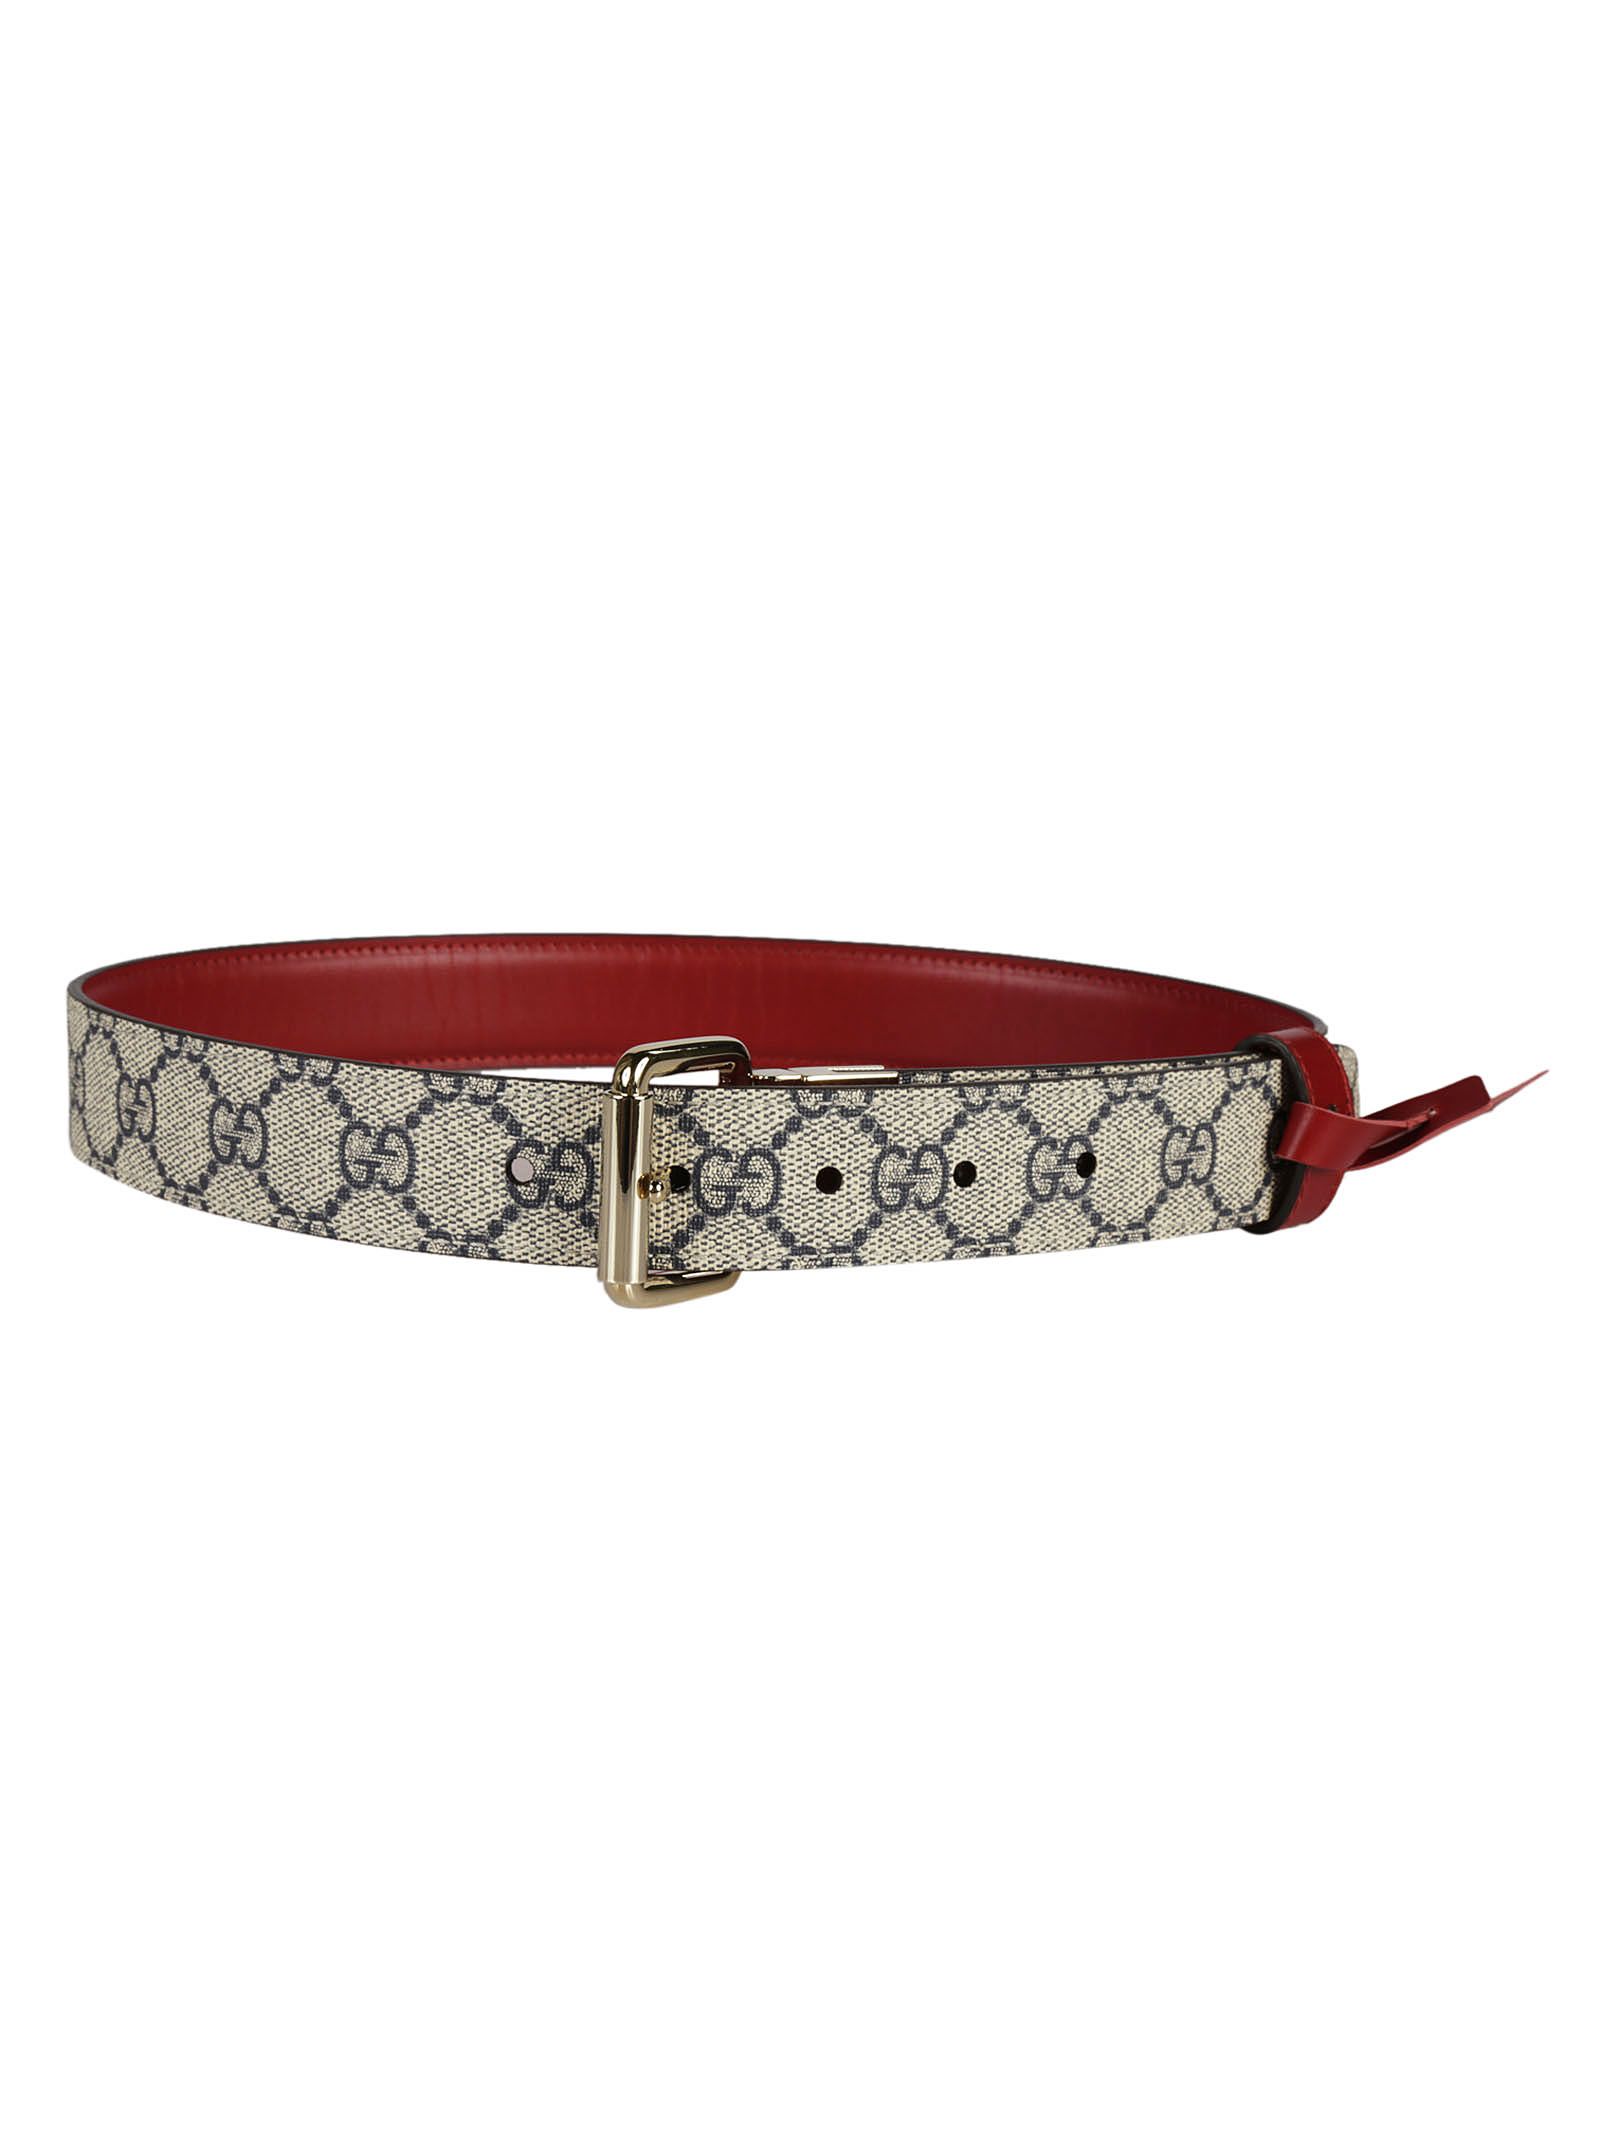 Gucci Belt GG Supreme Leather Trimmed 1.5W Beige/Ebony in Canvas/Leather  with Silver-tone - US